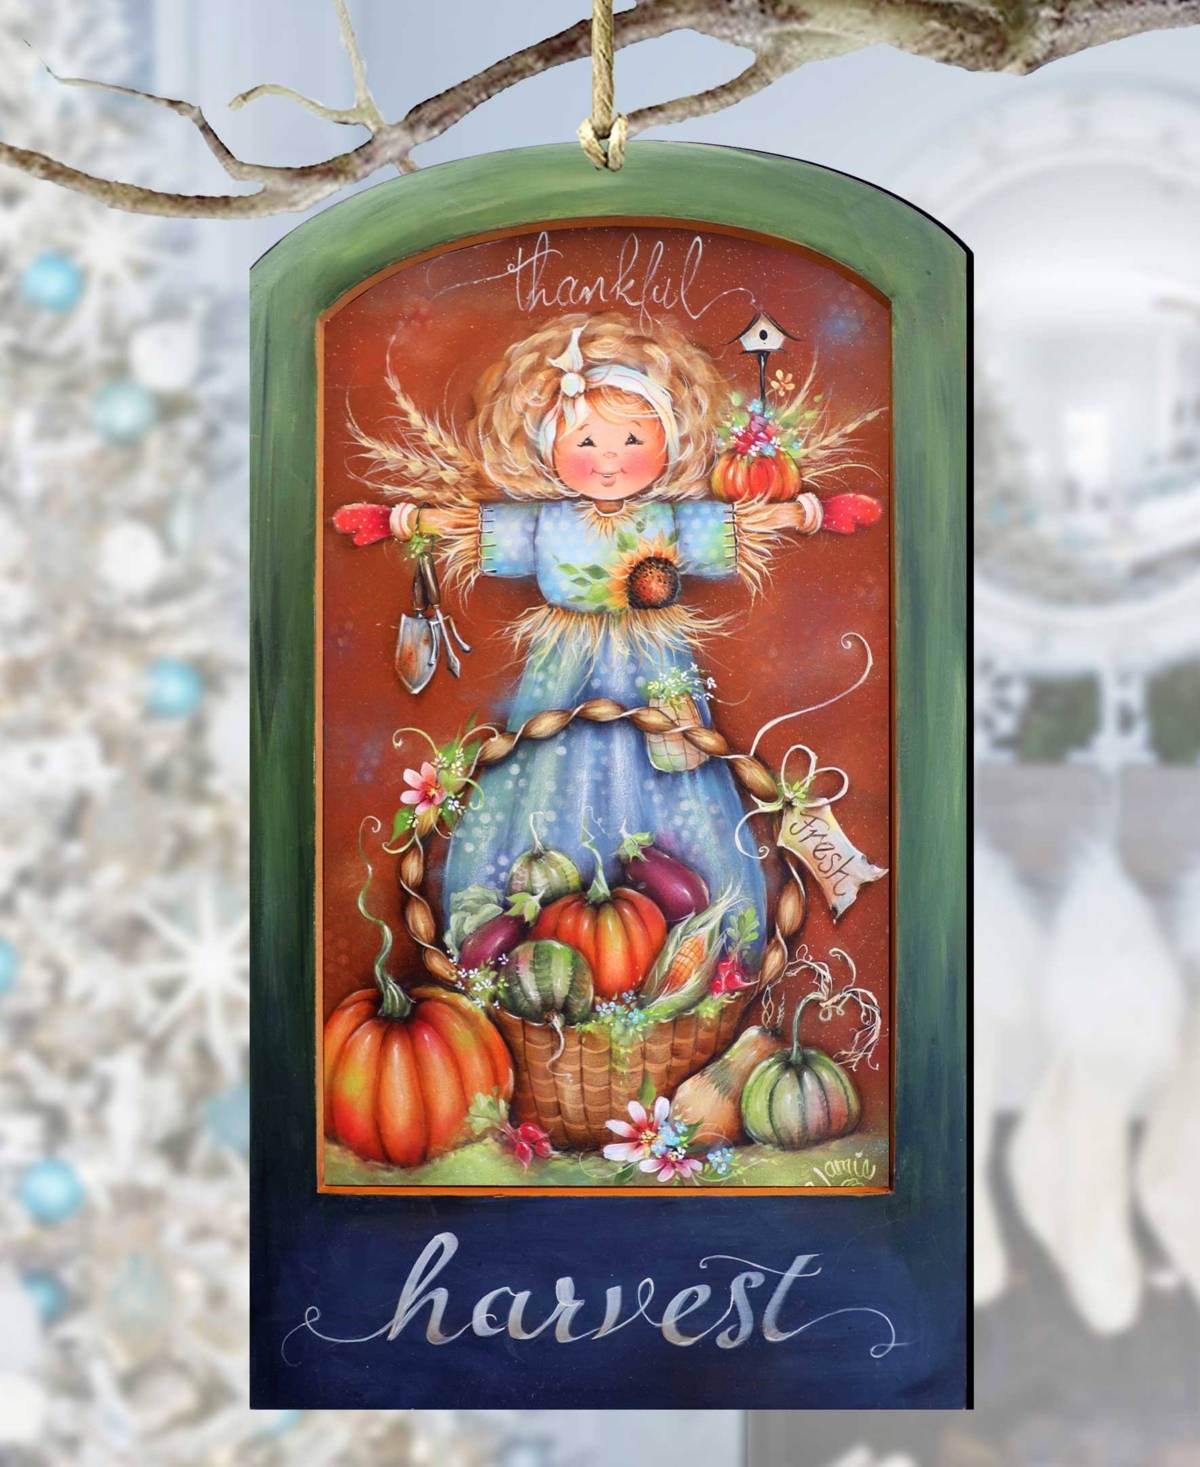 Designocracy Holiday Wooden Ornaments Thankful Harvest Home Decor J. Mills-price In Multi Color